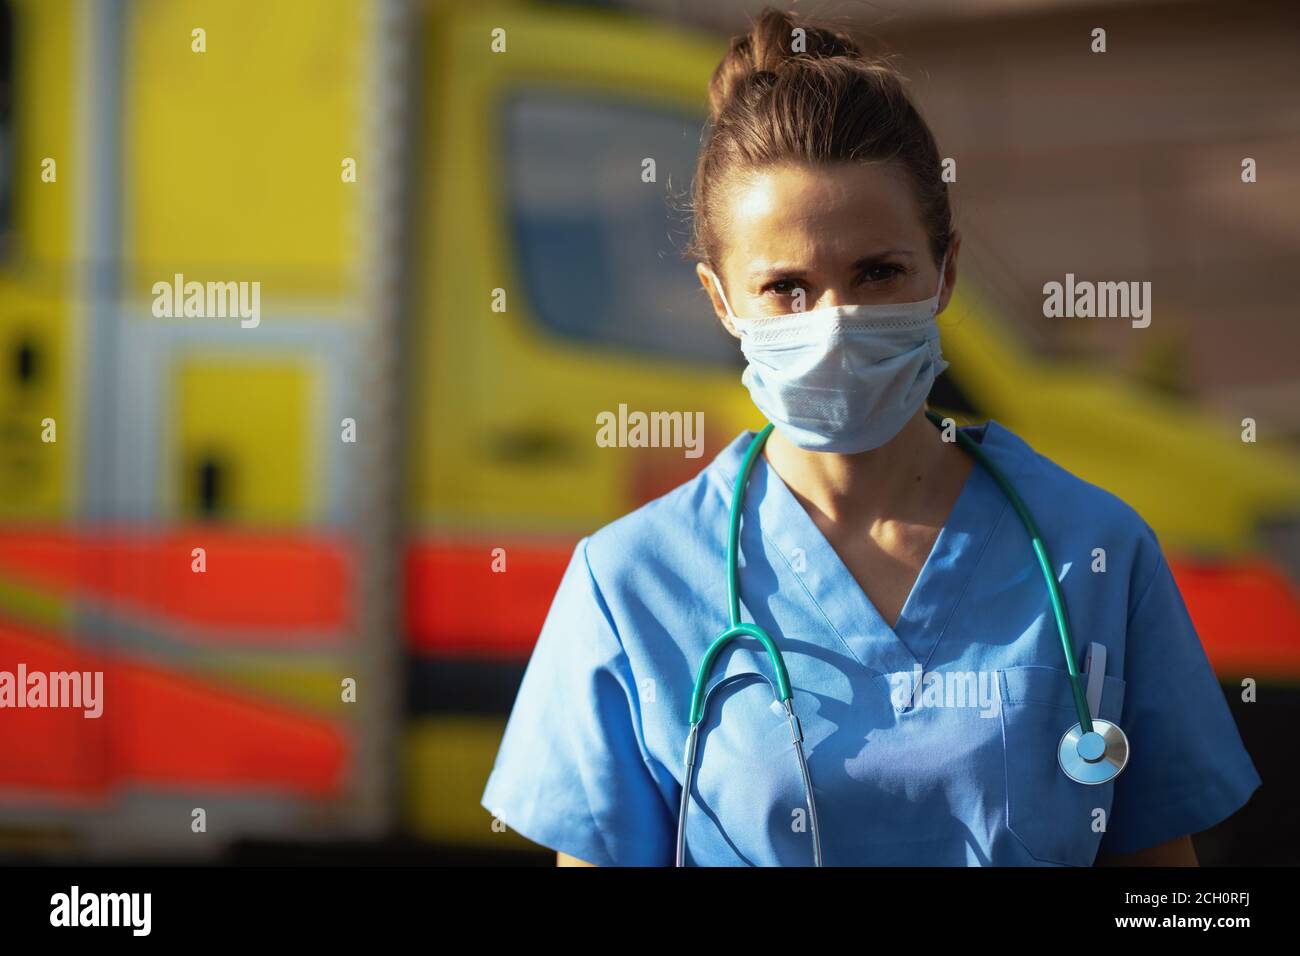 covid-19 pandemic. Portrait of modern medical doctor woman in scrubs with stethoscope and medical mask outside near ambulance. Stock Photo